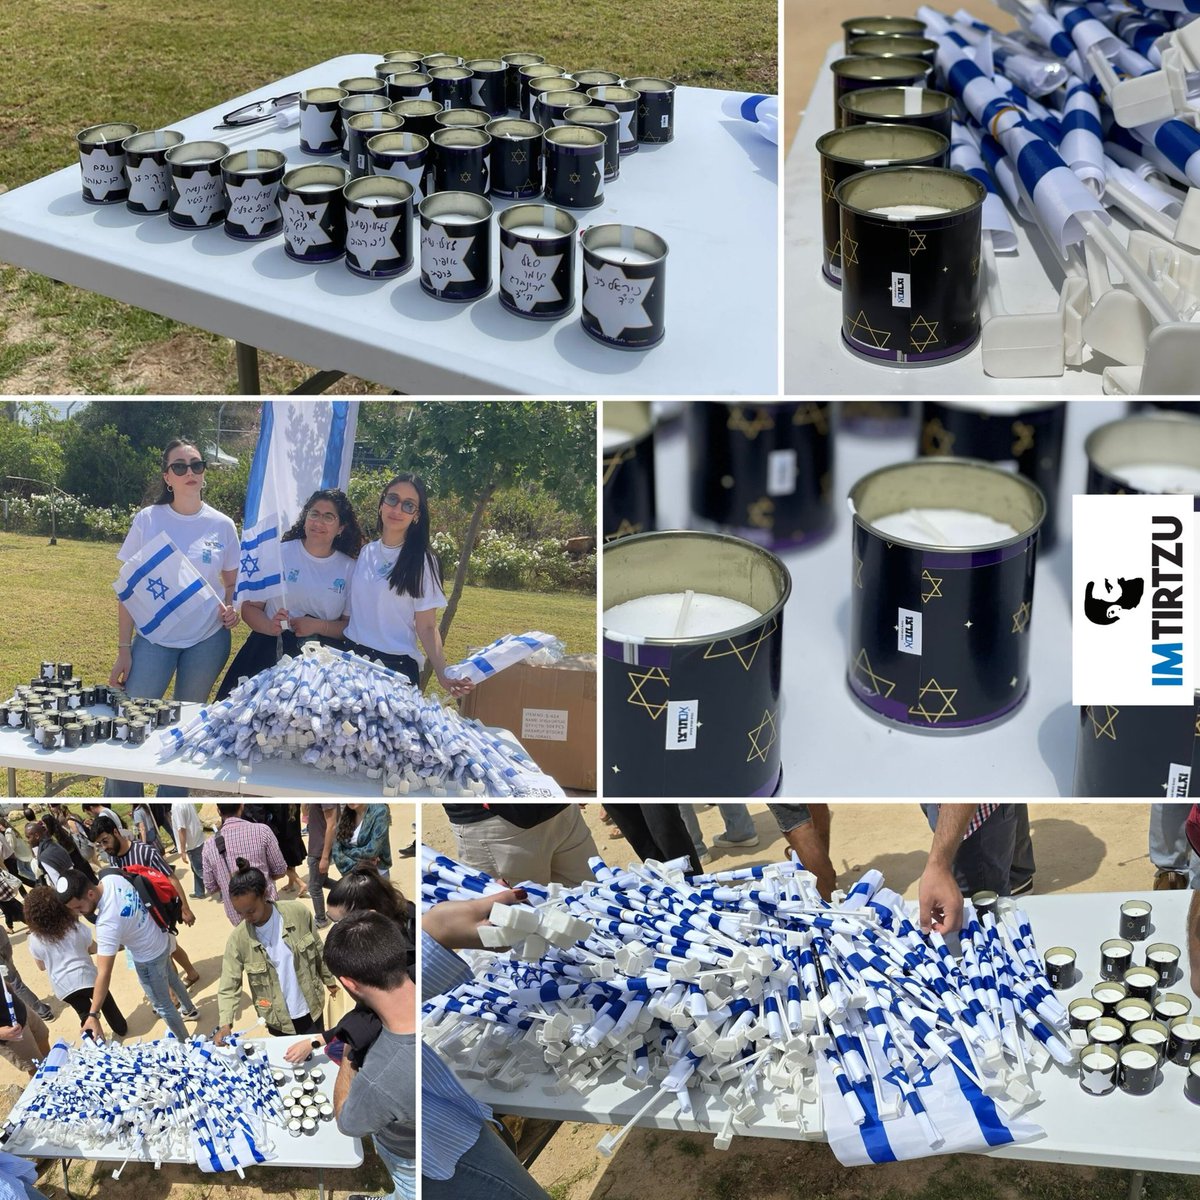 On the eve of Memorial Day and Independence Day, we set up a memorial stand for the fallen and distributed flags in several locations: Ariel University of Samaria, Sammy Shimon College in Beer Sheva, Azrieli College in Jerusalem. Together, we will paint Israel blue and white 🇮🇱.